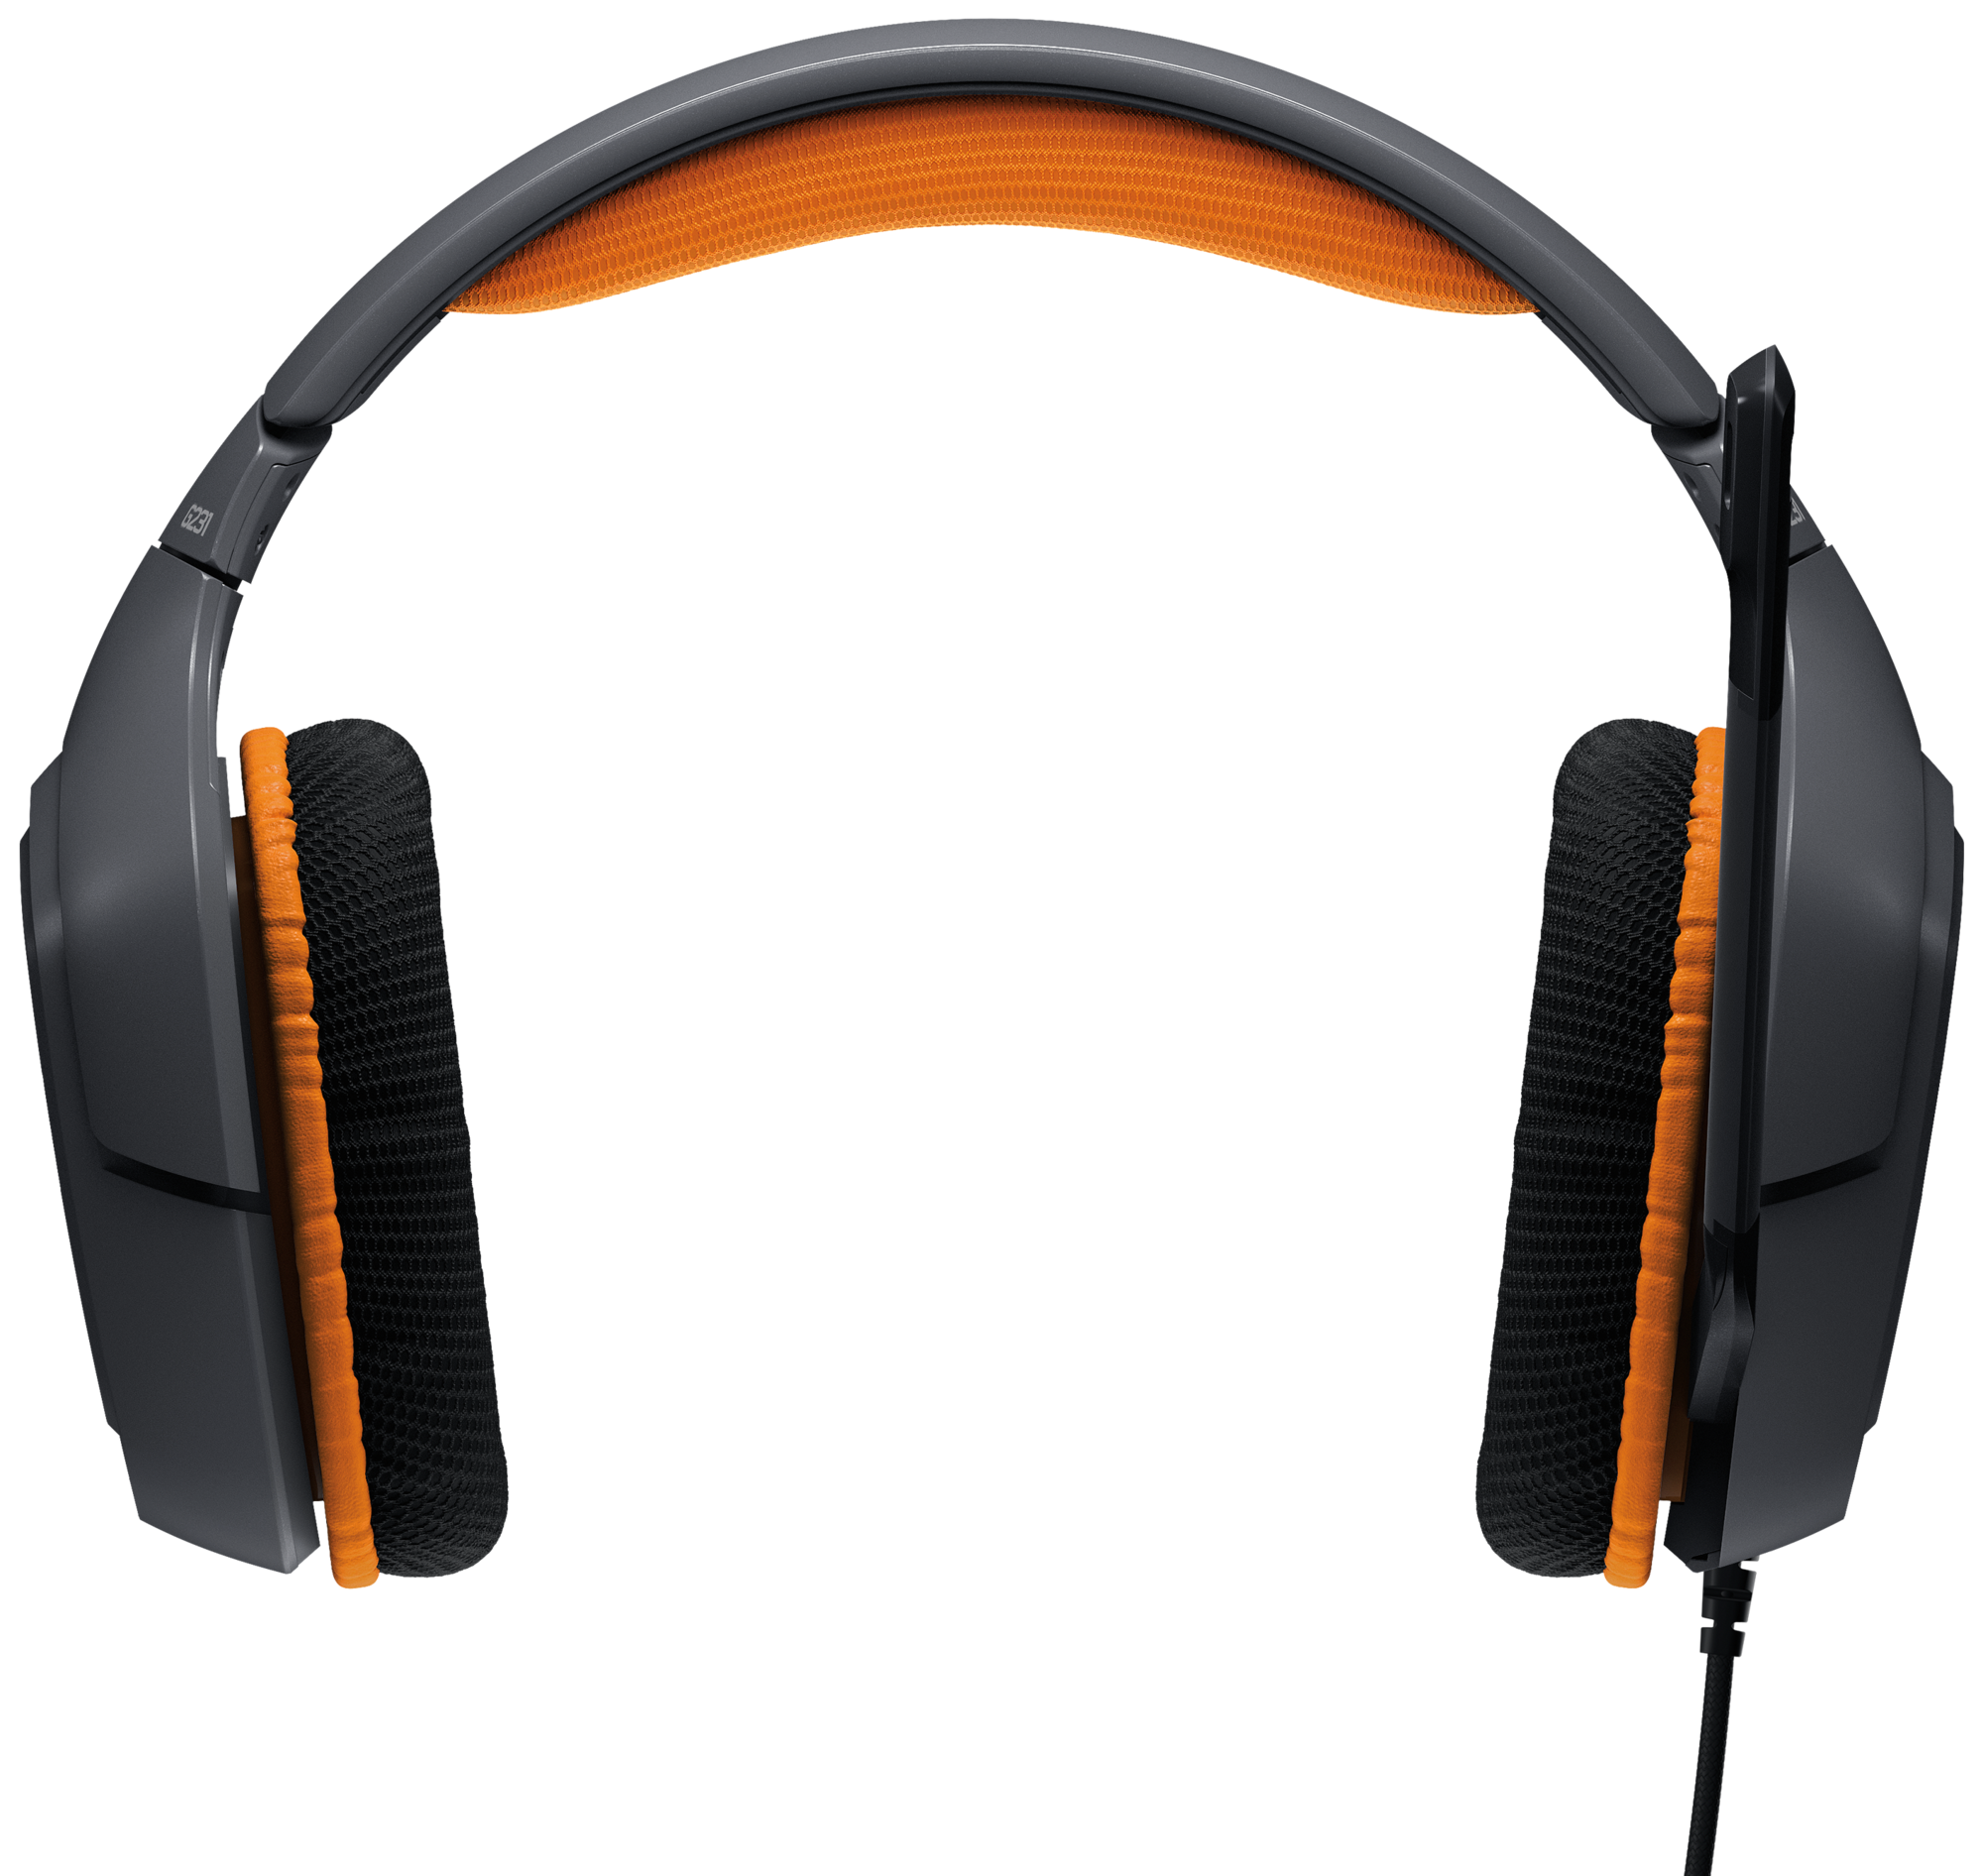 Headphones PNG Images Transparent Background | PNG Play